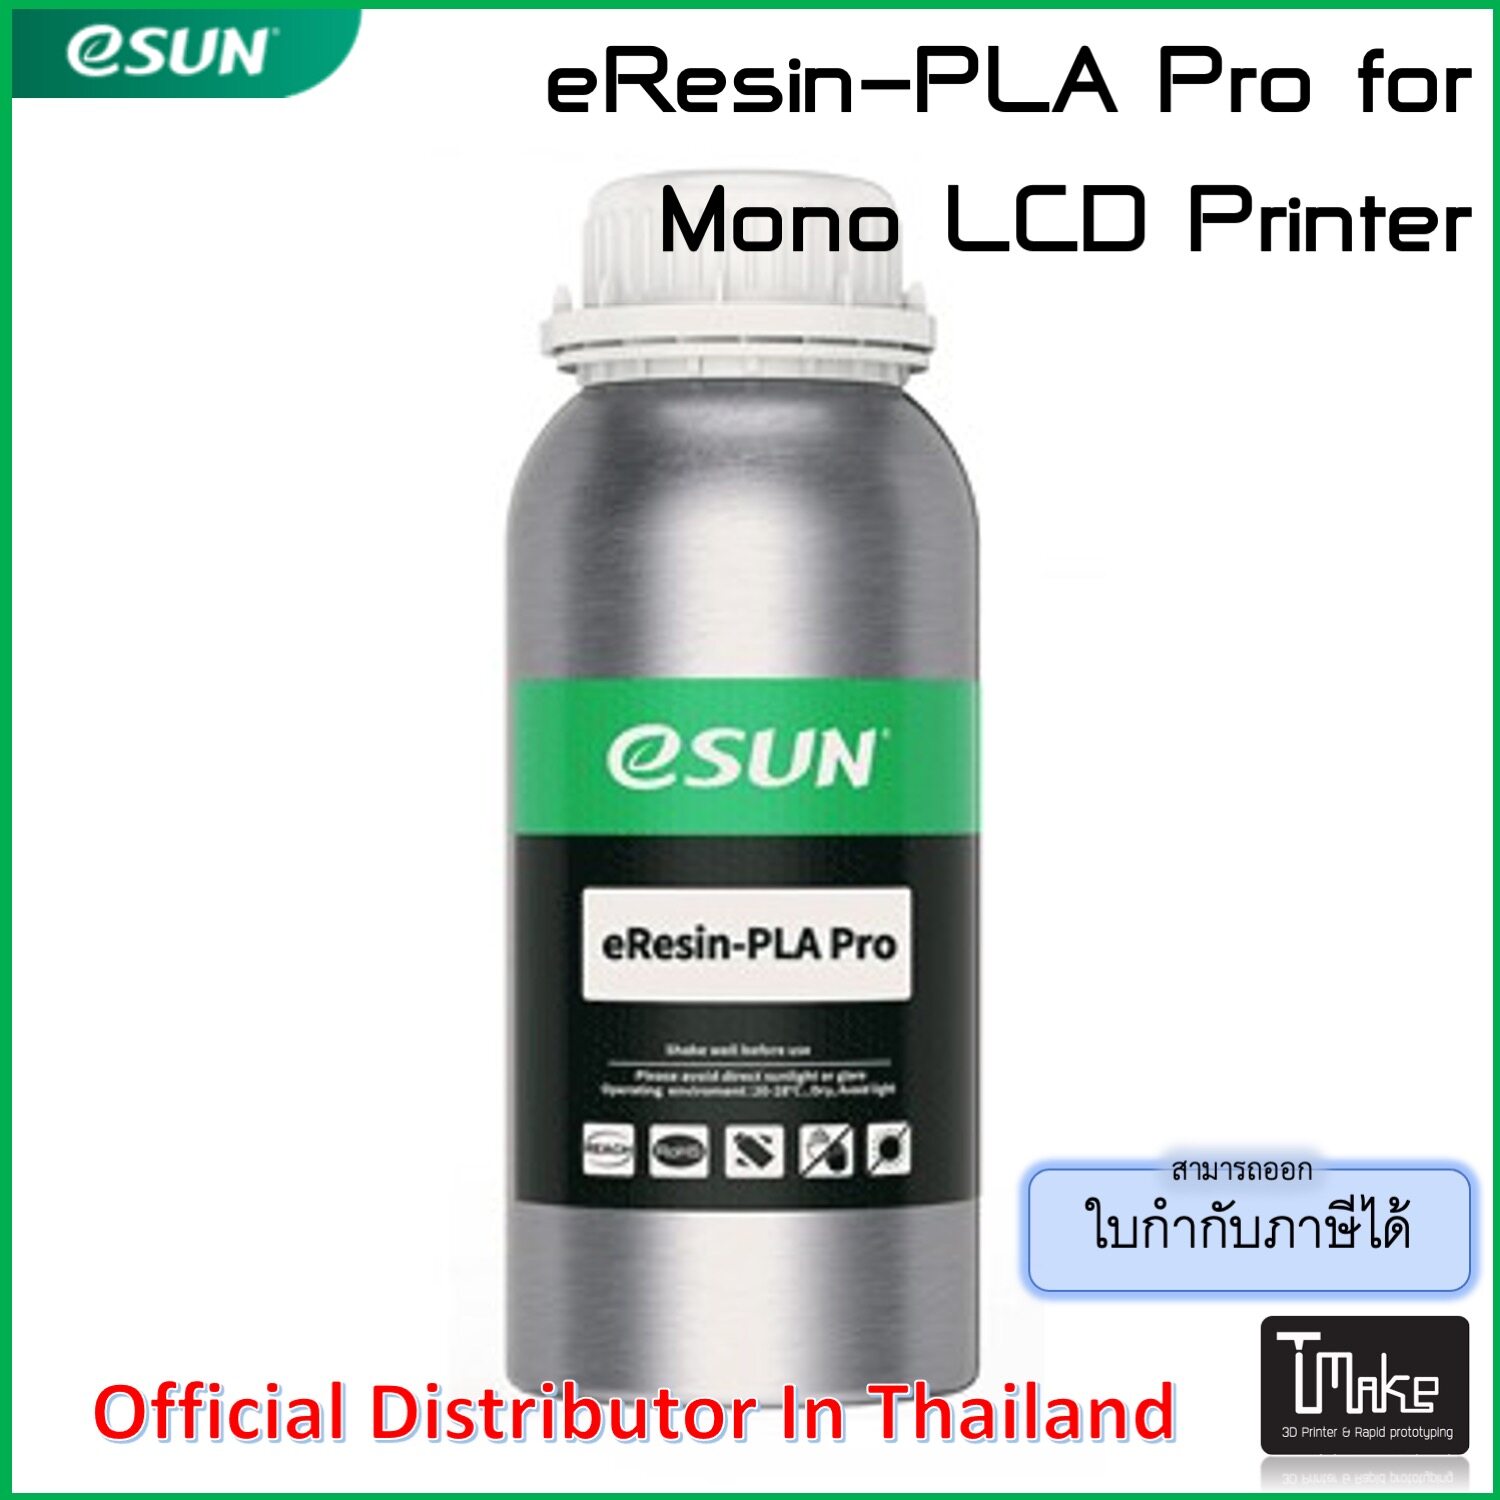 eSUN eResin-PLA Pro resin for Large size LCD and Mono LCD Printer Color Grey 1 Kg